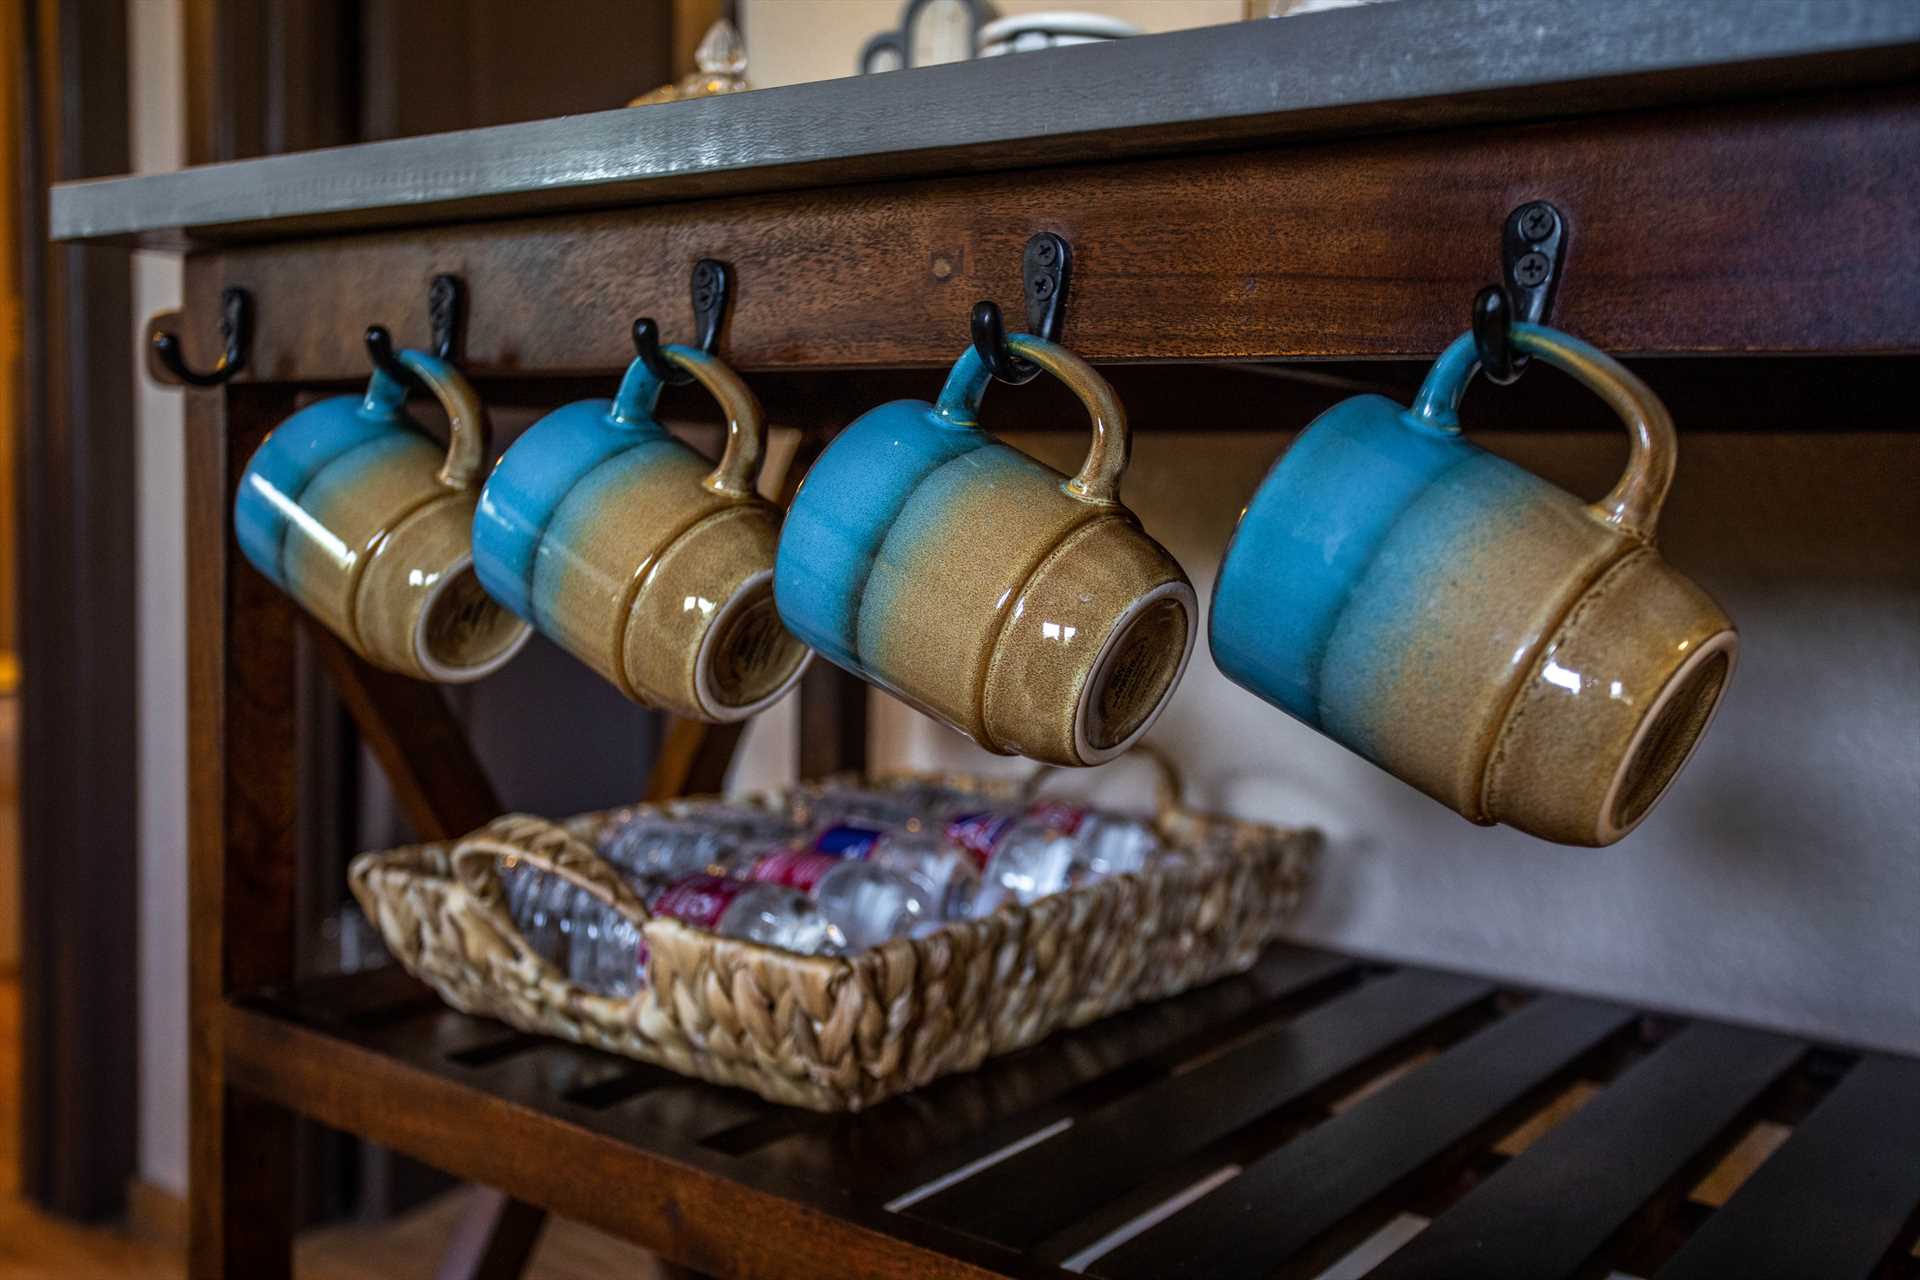                                                 Plenty of pots, pans, serving ware, cups, glasses, and utensils are stocked in the country kitchen, too!